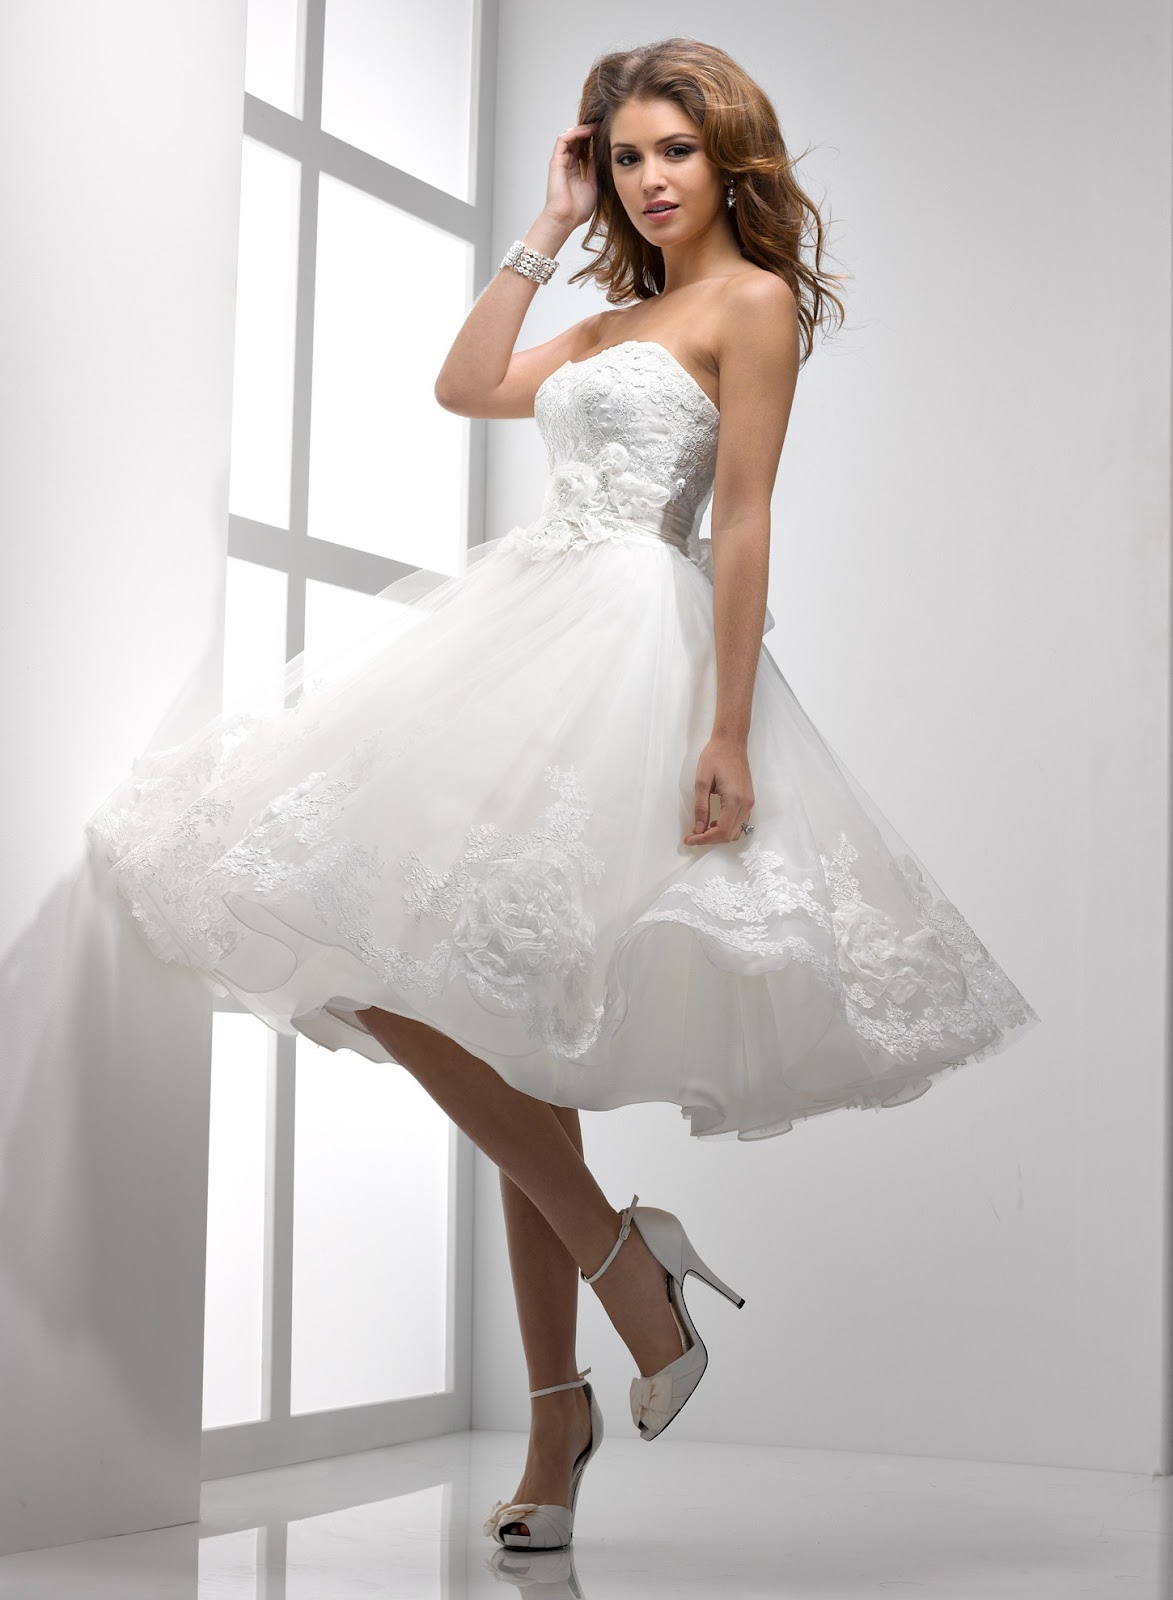 WhiteAzalea Ball Gowns: Short Lace Ball Gown Dresses